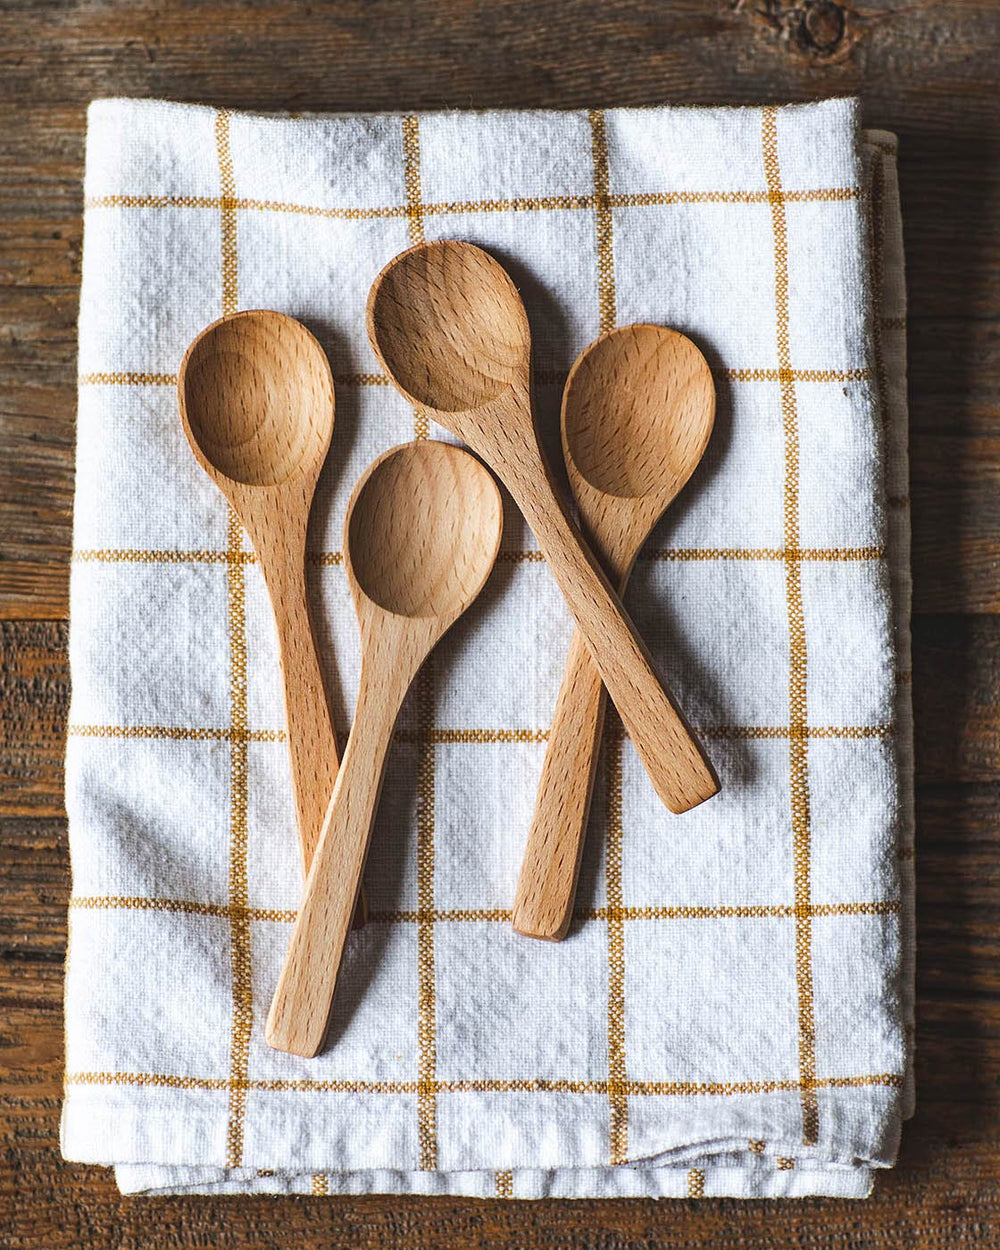 Farmhouse Pottery Essential Kitchen Utensils - Set of Six (6) in BEECH or  WALNUT - THE BEACH PLUM COMPANY